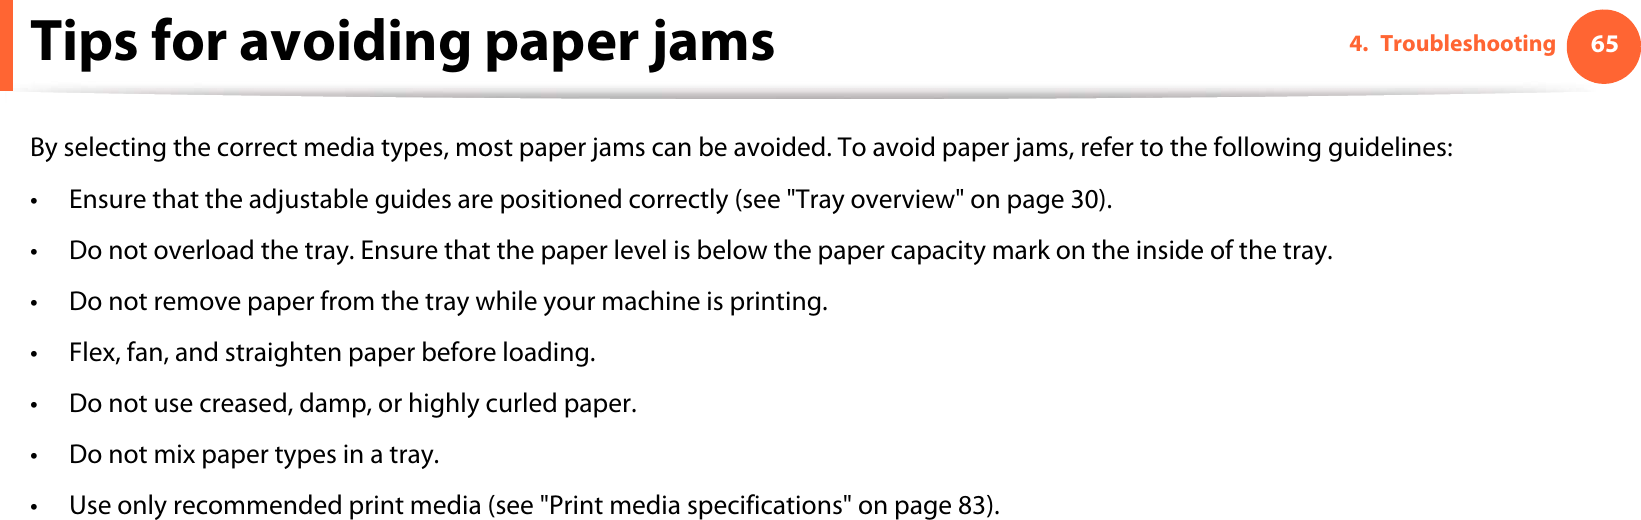 654. TroubleshootingTips for avoiding paper jamsBy selecting the correct media types, most paper jams can be avoided. To avoid paper jams, refer to the following guidelines:• Ensure that the adjustable guides are positioned correctly (see &quot;Tray overview&quot; on page 30).• Do not overload the tray. Ensure that the paper level is below the paper capacity mark on the inside of the tray.• Do not remove paper from the tray while your machine is printing.• Flex, fan, and straighten paper before loading. • Do not use creased, damp, or highly curled paper.• Do not mix paper types in a tray.• Use only recommended print media (see &quot;Print media specifications&quot; on page 83).